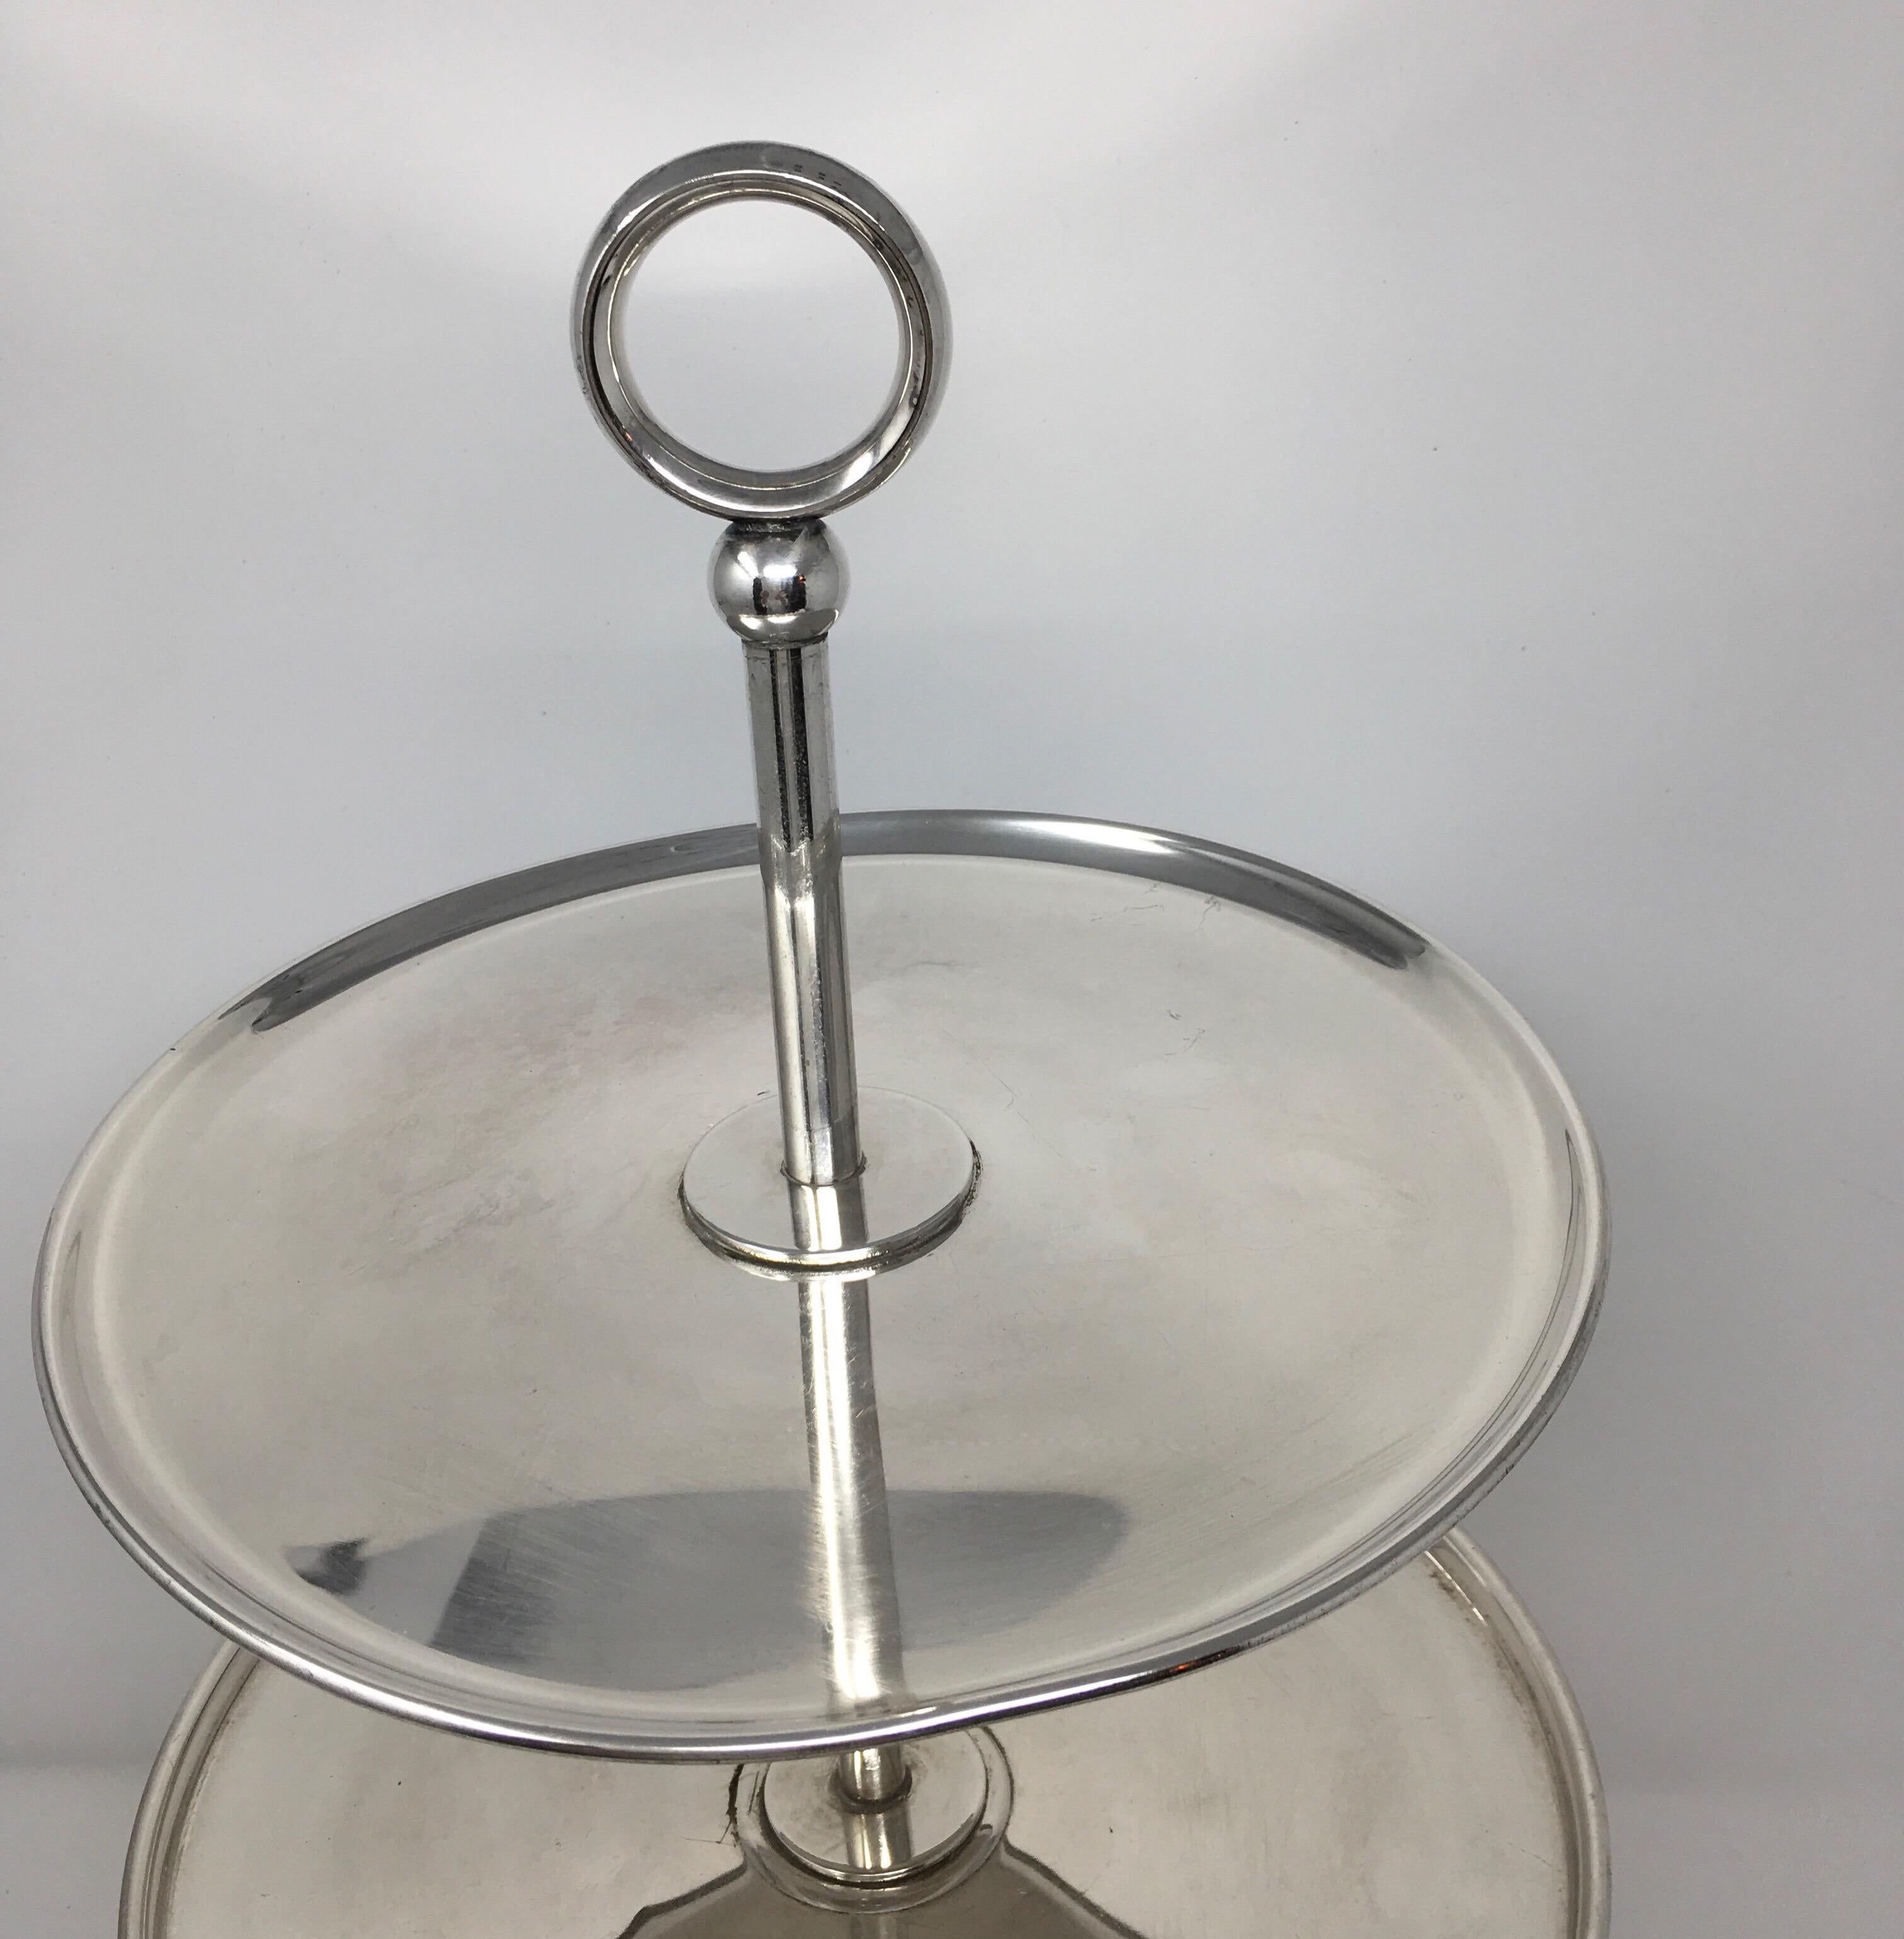 Found in the South of France, this beautifully crafted vintage 3-tier dessert stand from polished silver plate, is characterized by classically clean and understated lines. Suitable for both formal and informal dining, this stand will lend a lavish